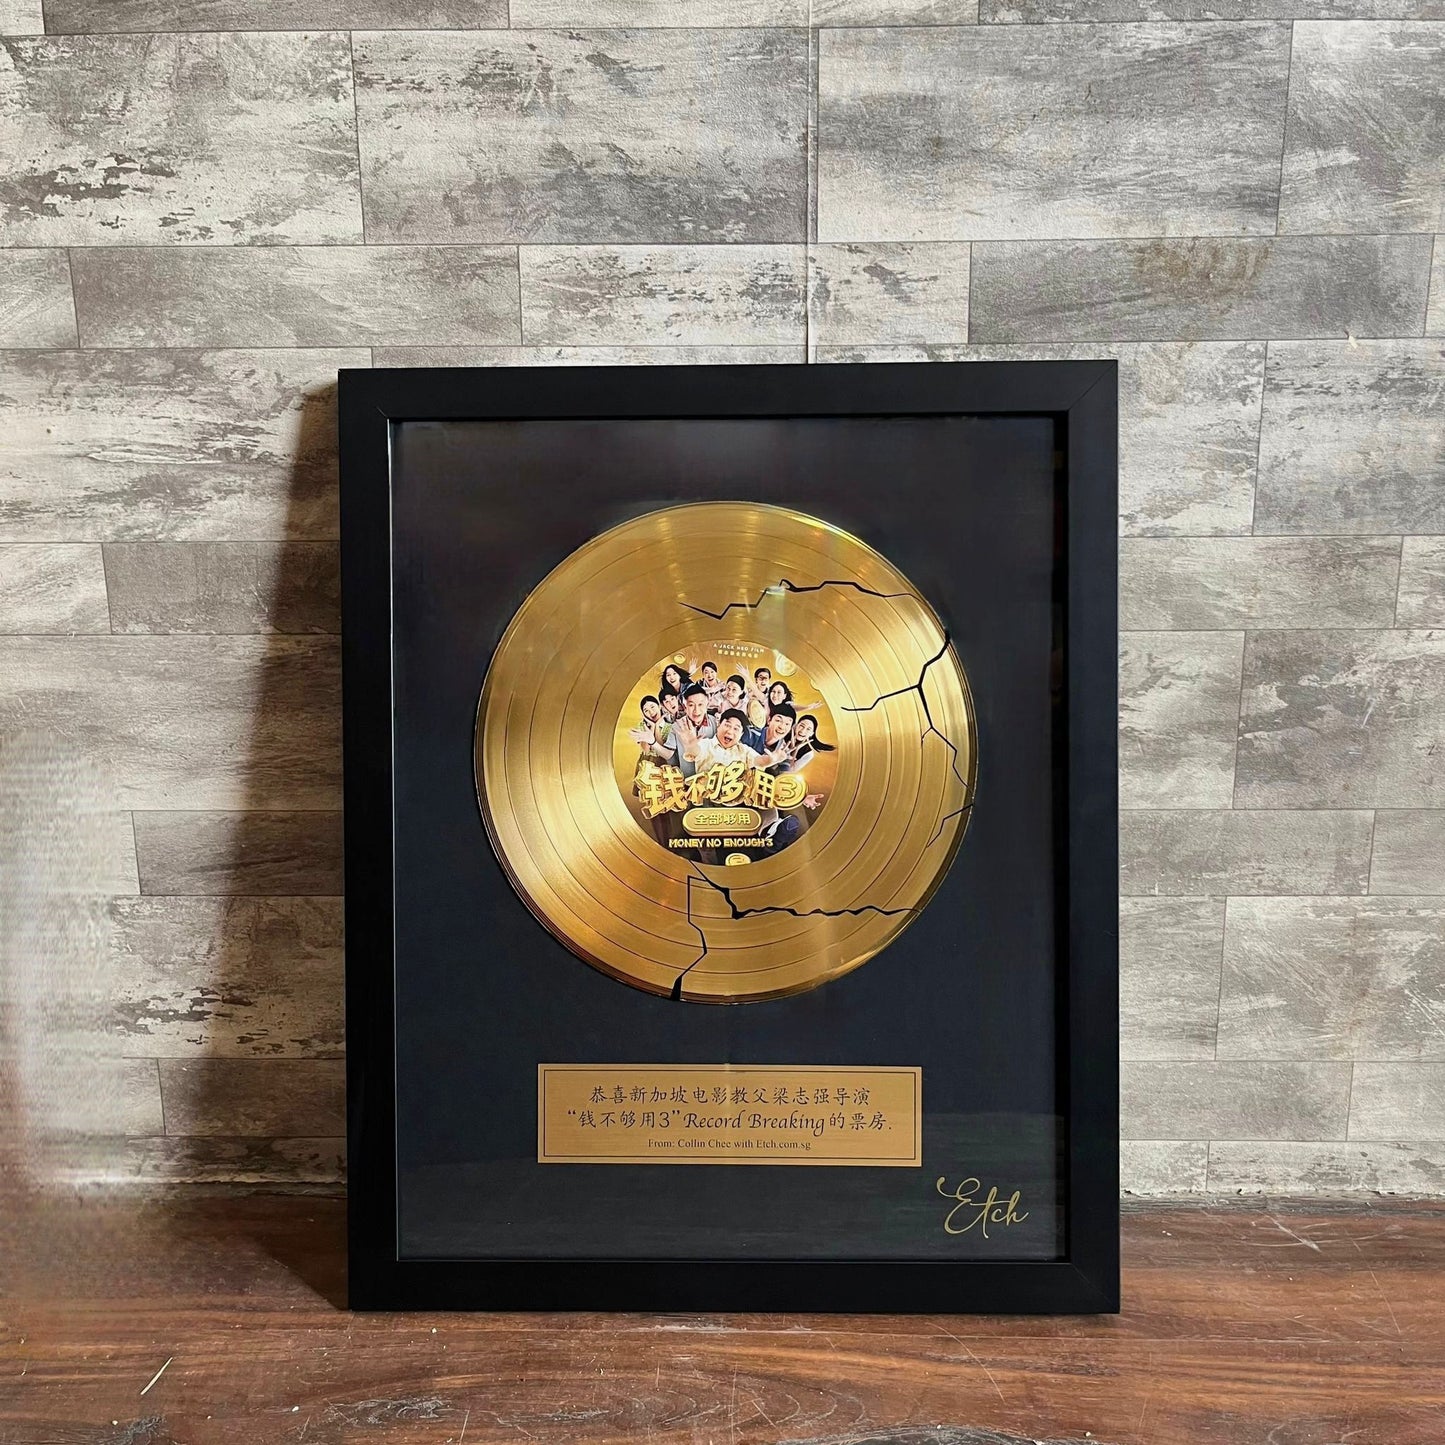 PERSONALISED Authentic Framed Gold Vinyl Record with Customised Plaque